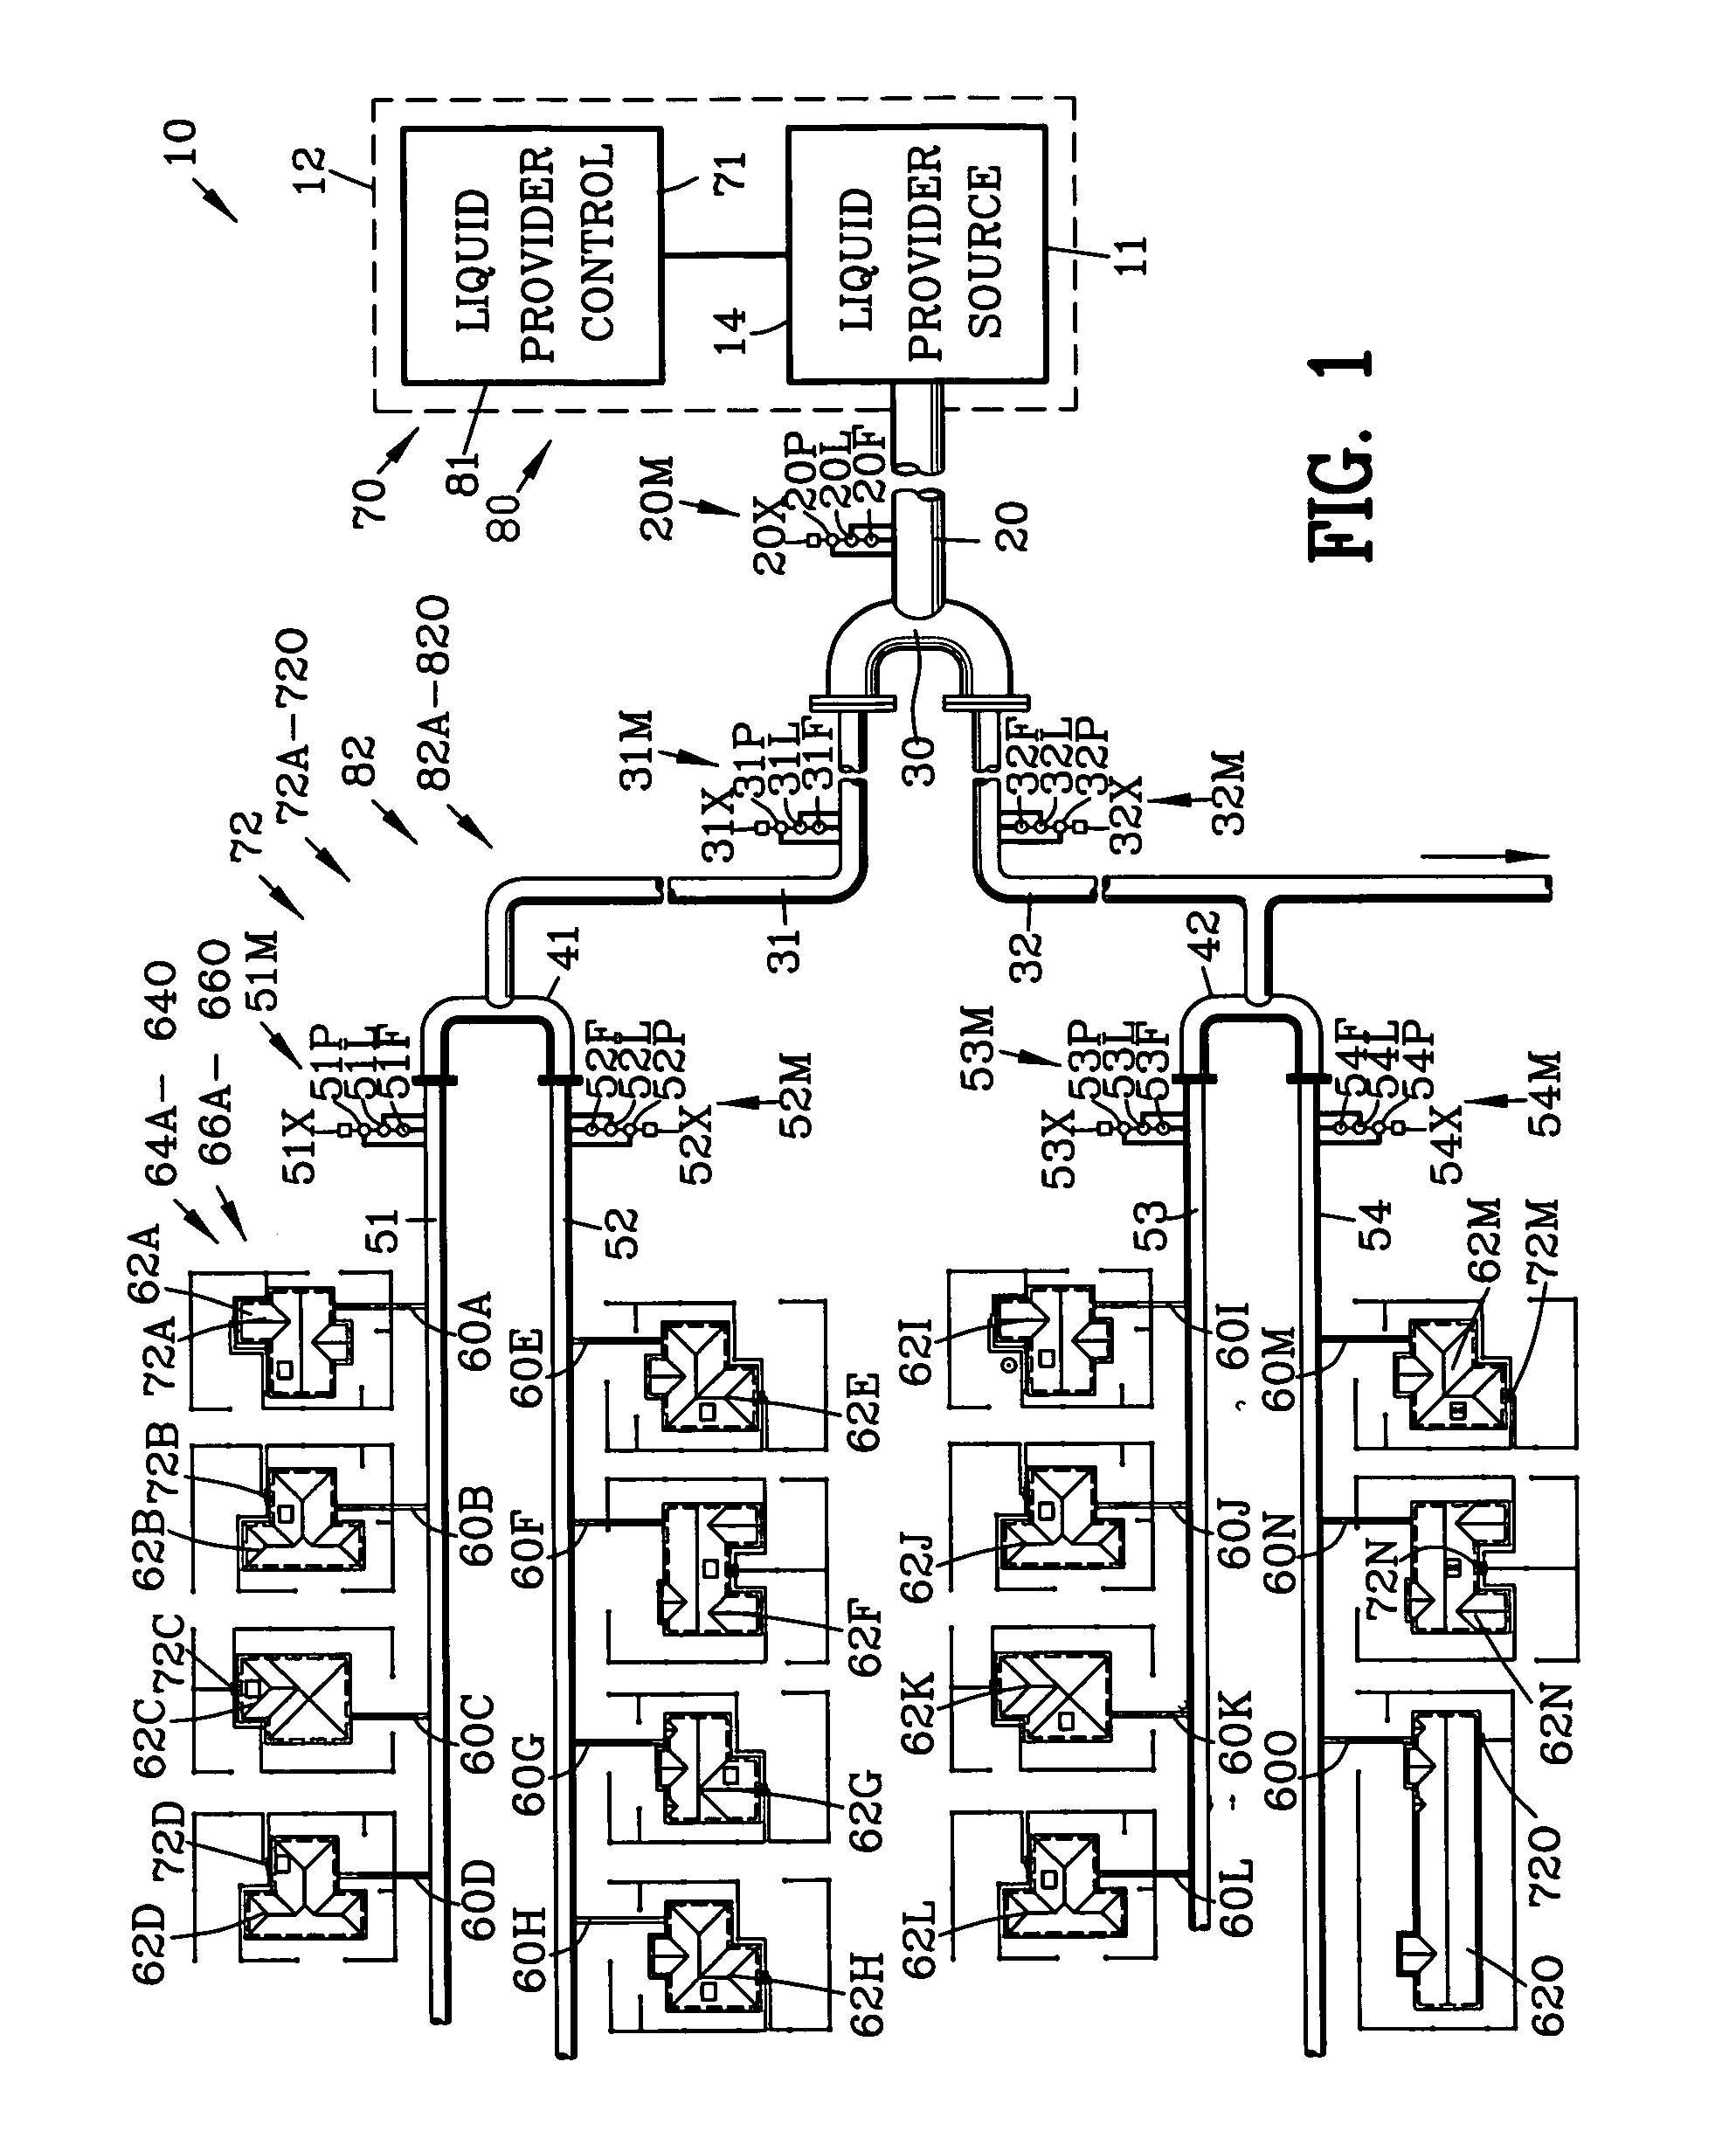 Adaptive control for irrigation system